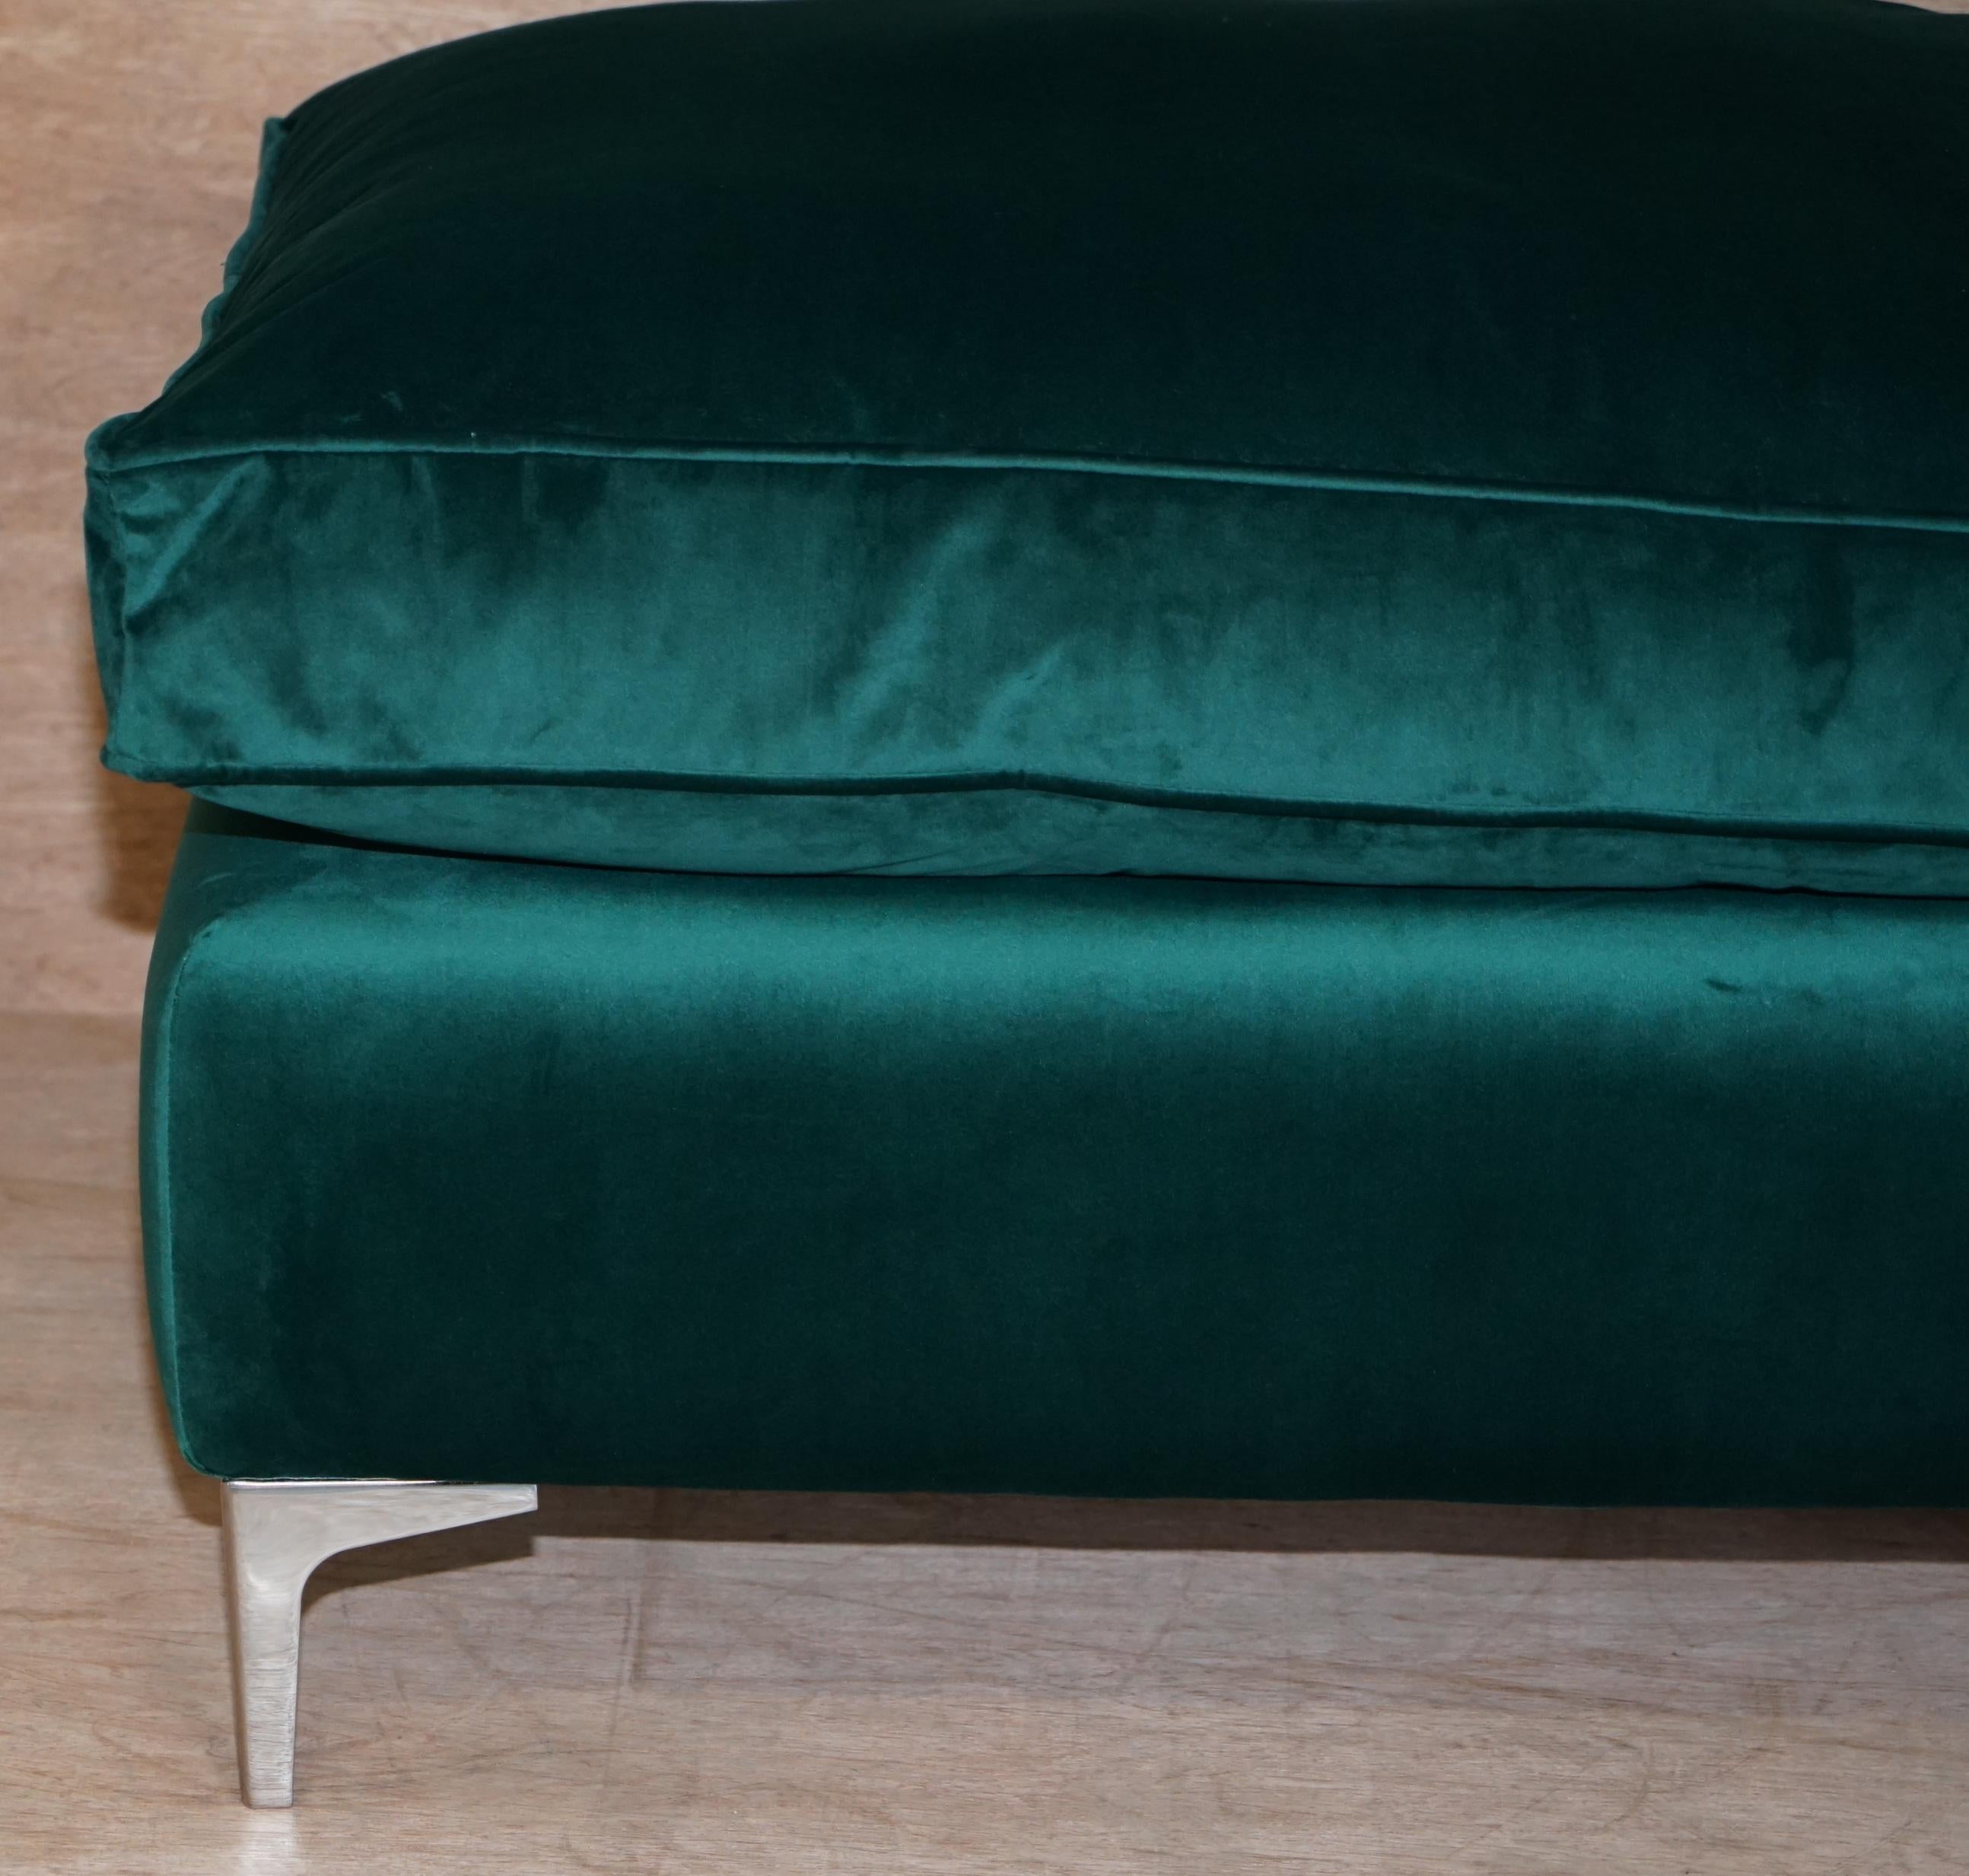 Art Deco Stunning Ex Display Emerald Green Velvet Large Ottoman Footstool or Bench Seat For Sale